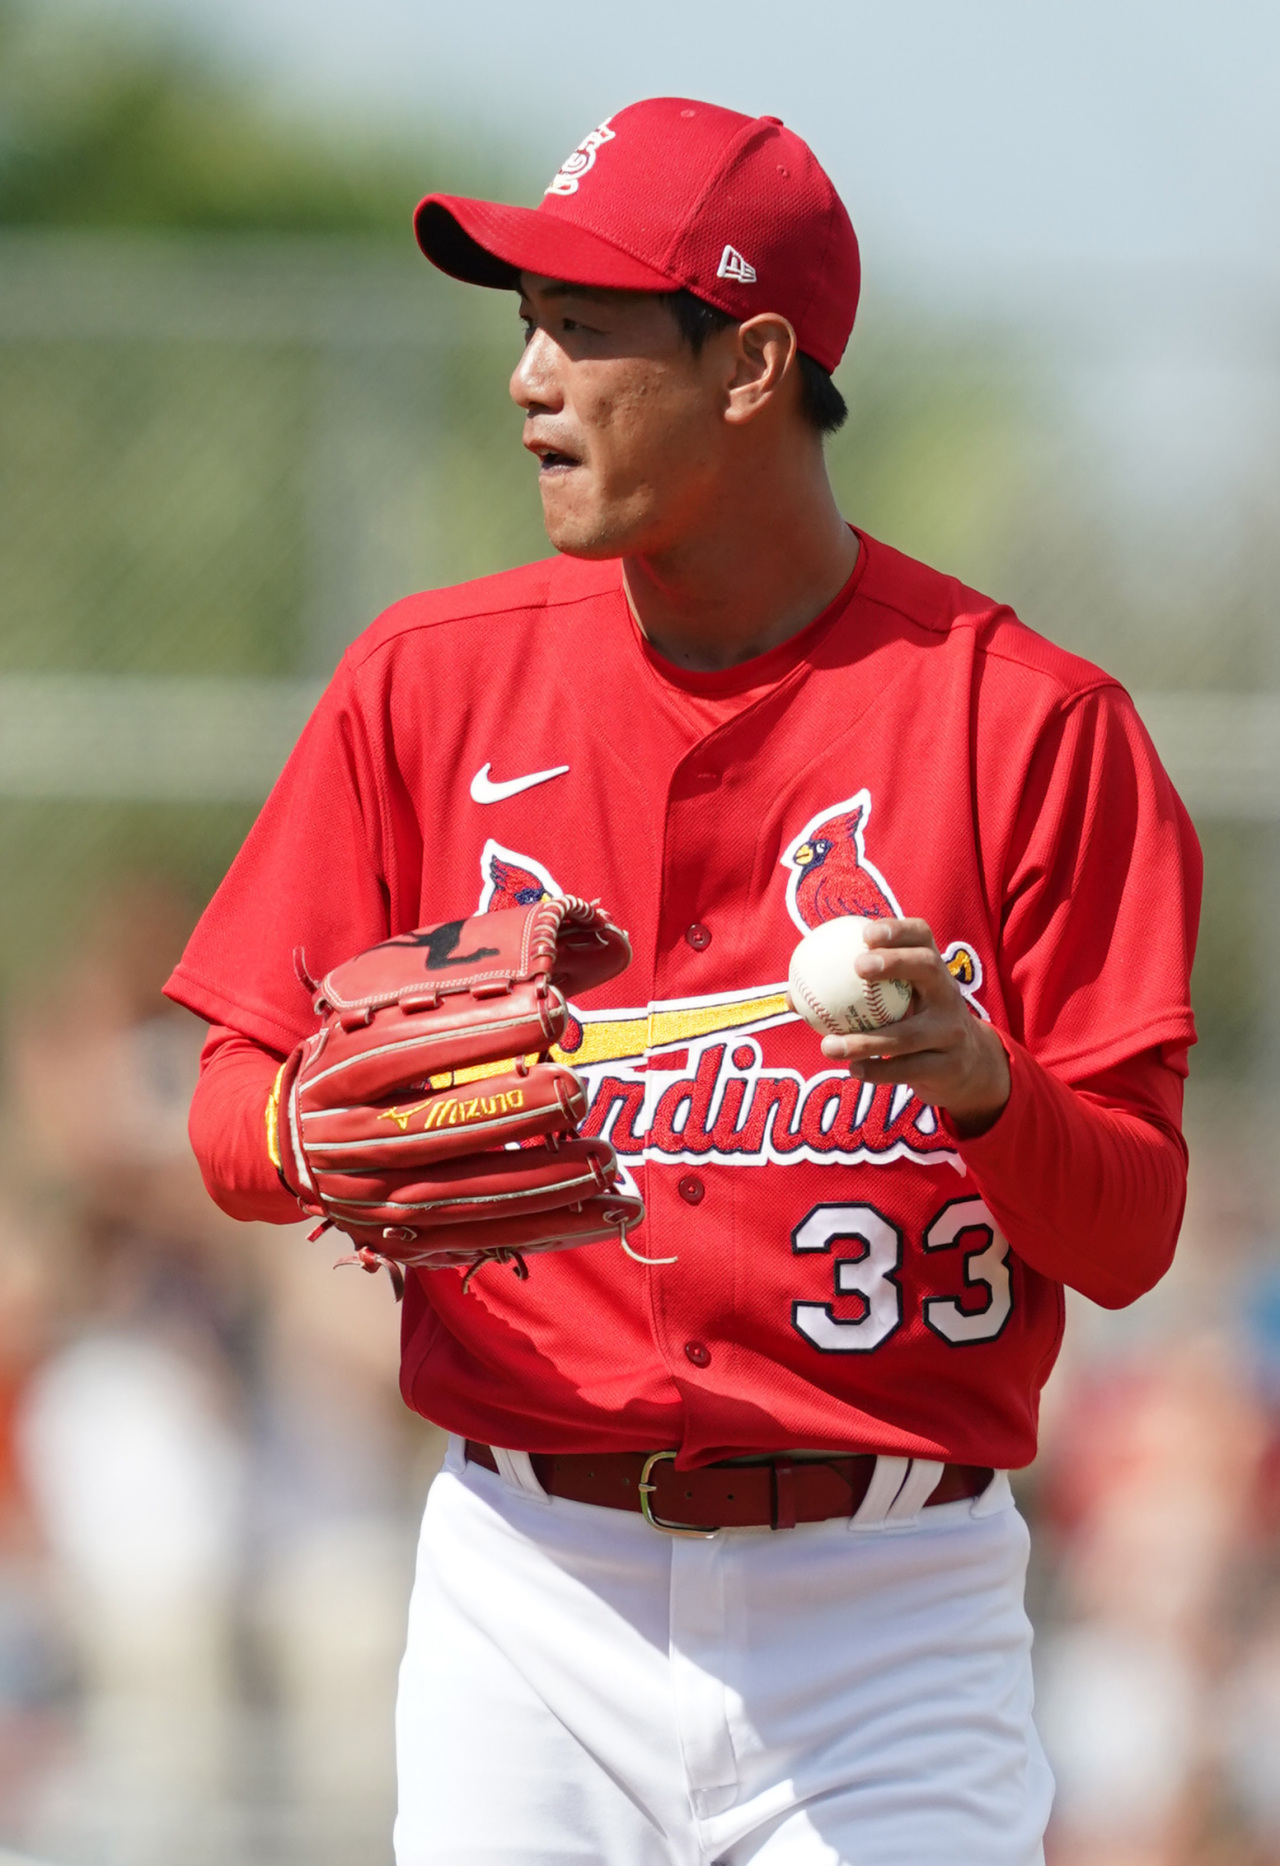 Fueled by home cooking, Cardinals' Kim Kwang-hyun puts on show for family